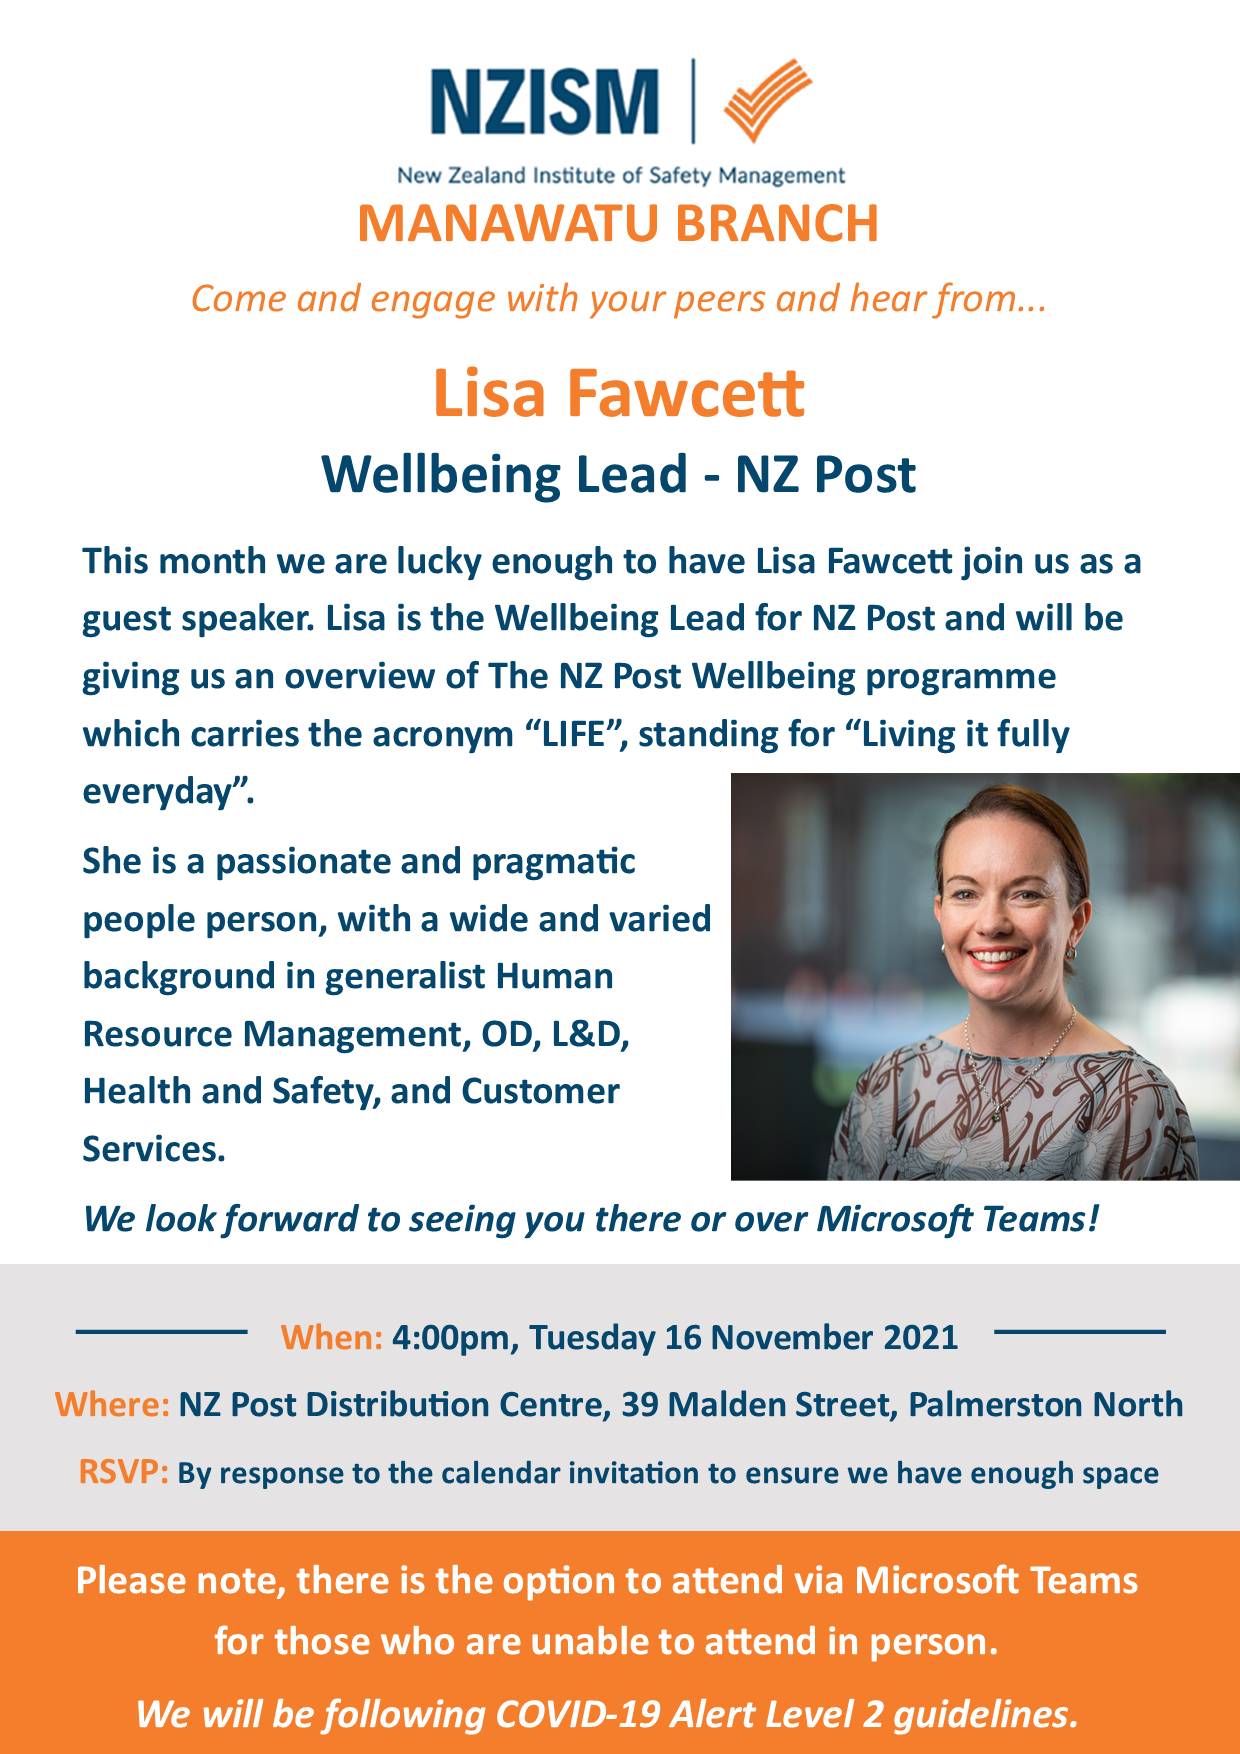 image for Manawatu Branch Meeting with NZ Post Wellbeing Lead, Lisa Fawcett